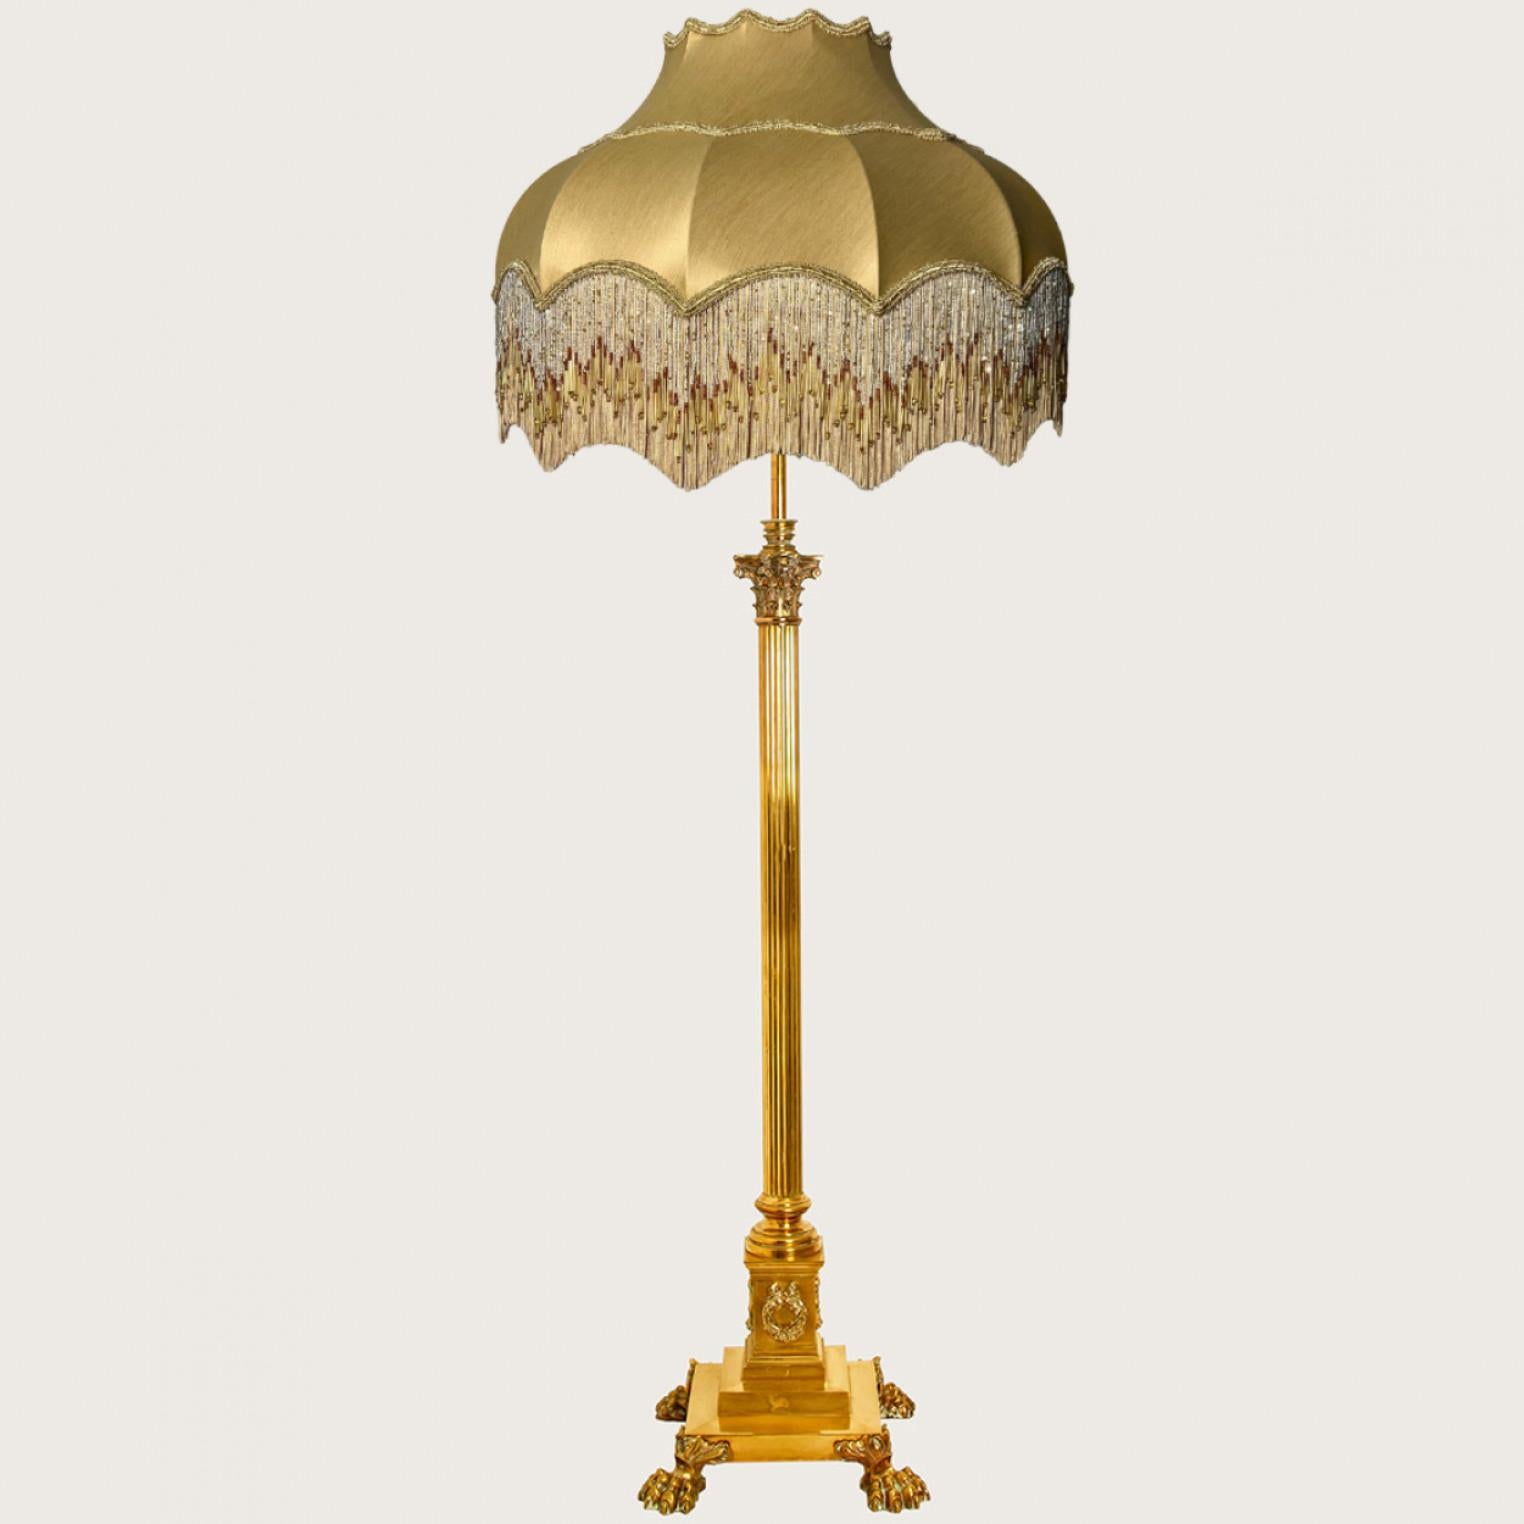 Antique corinthian column brass telescopic floorlamp, Hinks pattern, with wonderful handmade fringed lampshade. Made in England, in the style of James Hinks & Son in 1890.

The lamp features a striking scalloped lampshade in a warm gold with fringe